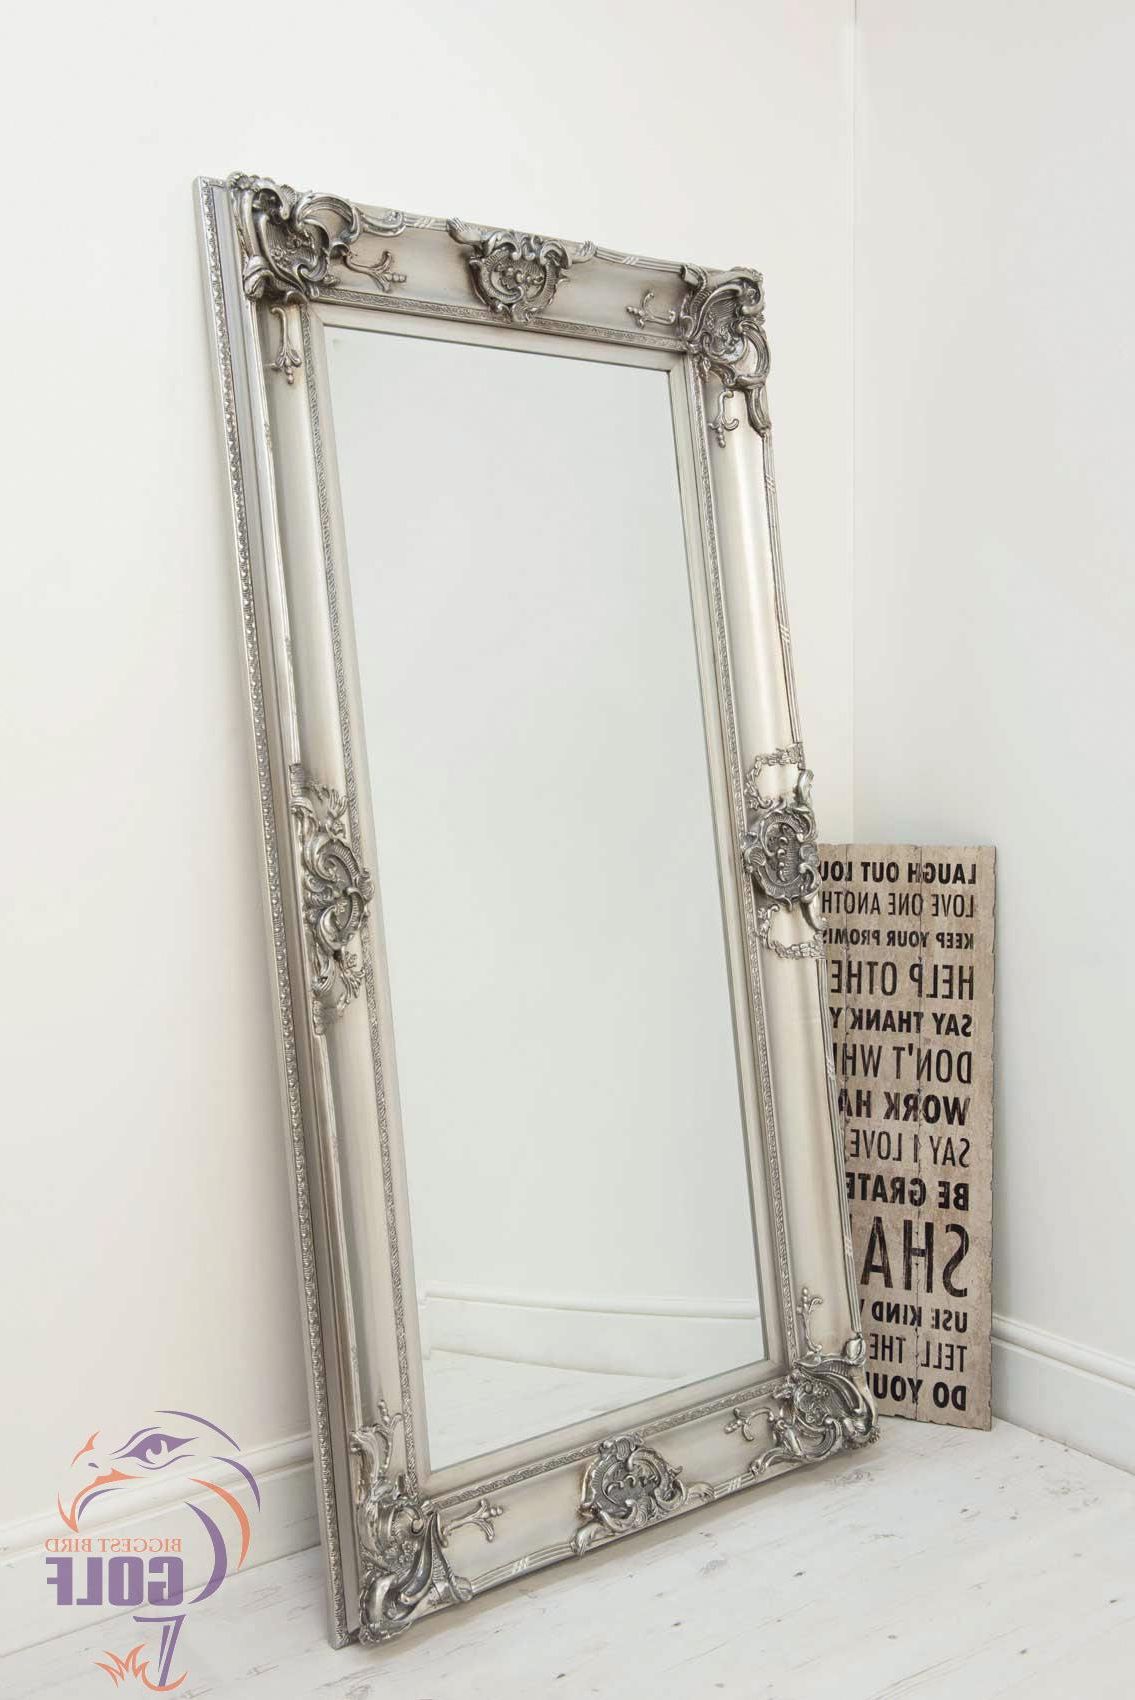 Massive Wall Mirrors Pertaining To Most Up To Date Details About Beautiful Large Silver Decorative Ornate Wall Mirror 6ft X  3ft 183 X 91cm (View 7 of 20)